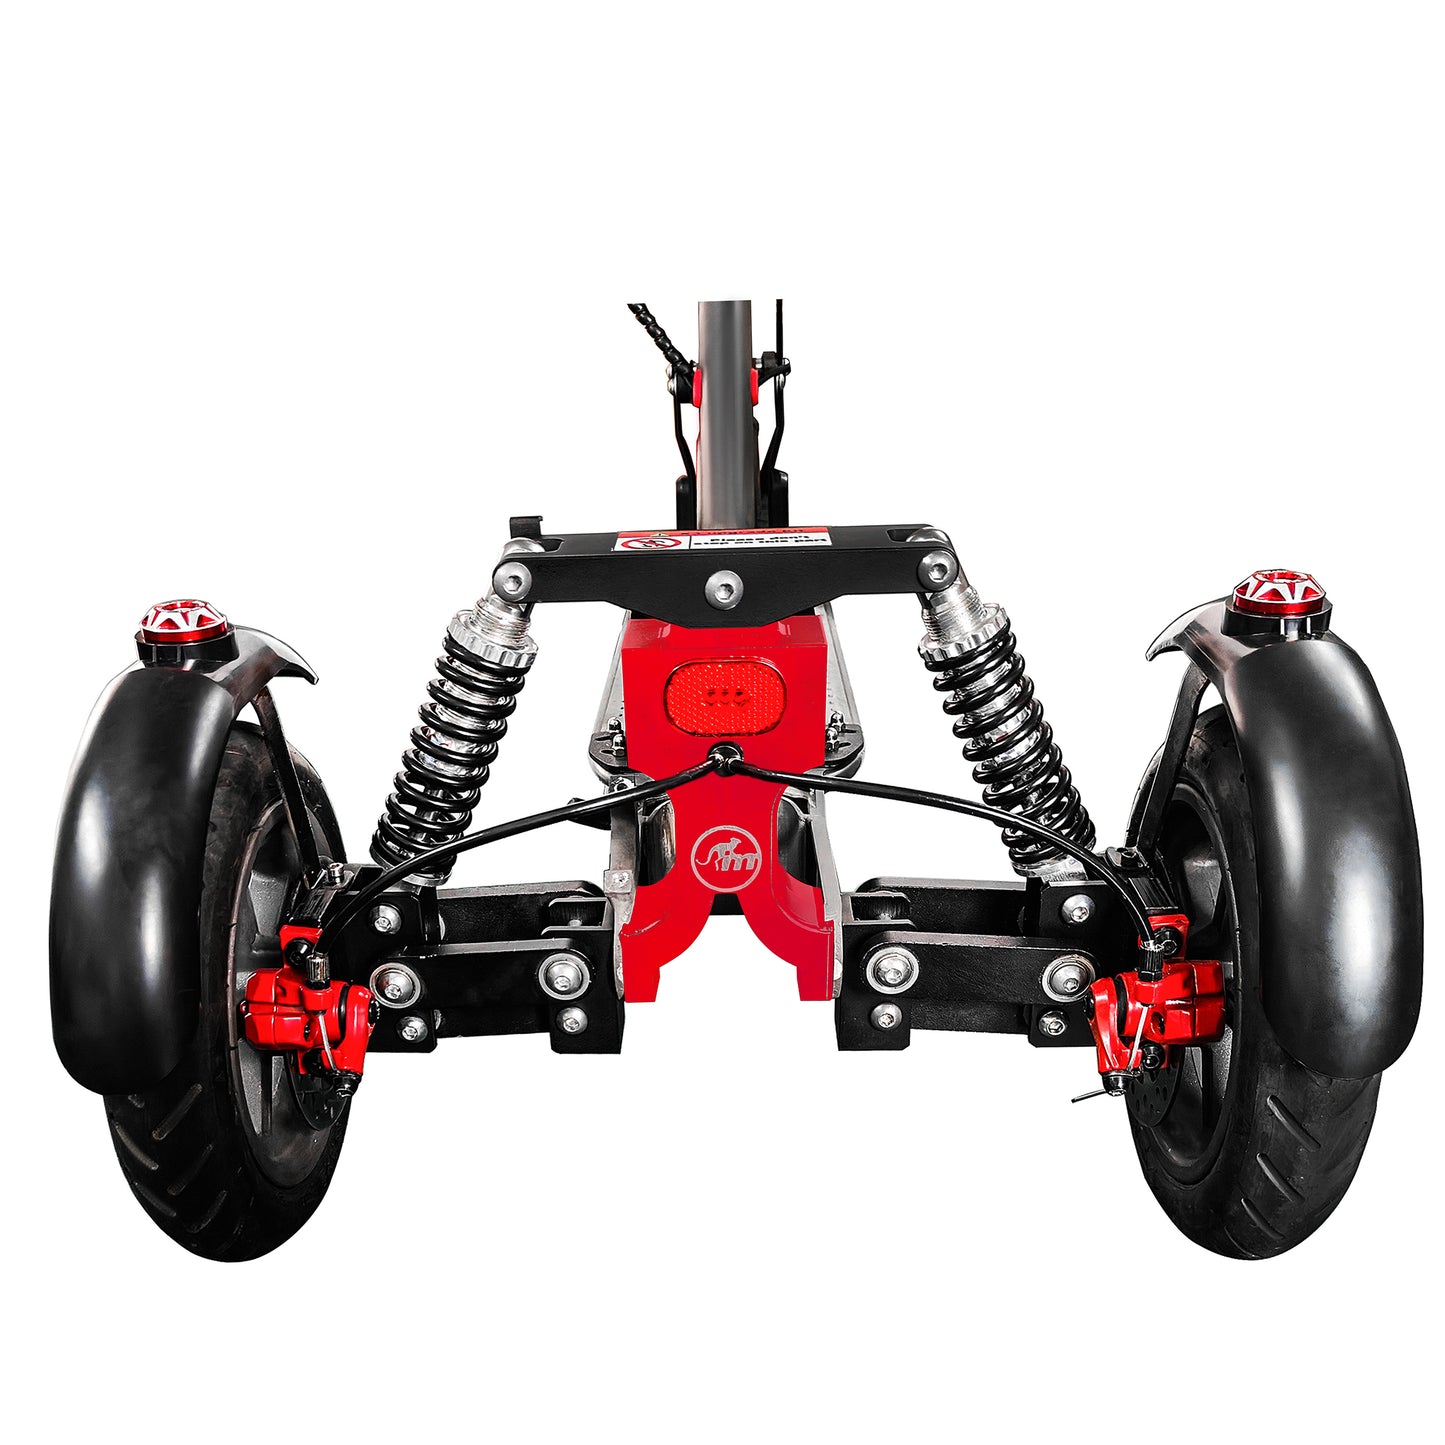 Monorim X3 upgrade kit to be Three wheels for Aovo pro/Kingsong/iscooter i8/Hiboy s2/iezway ez6/isinwheel s9 Scooter